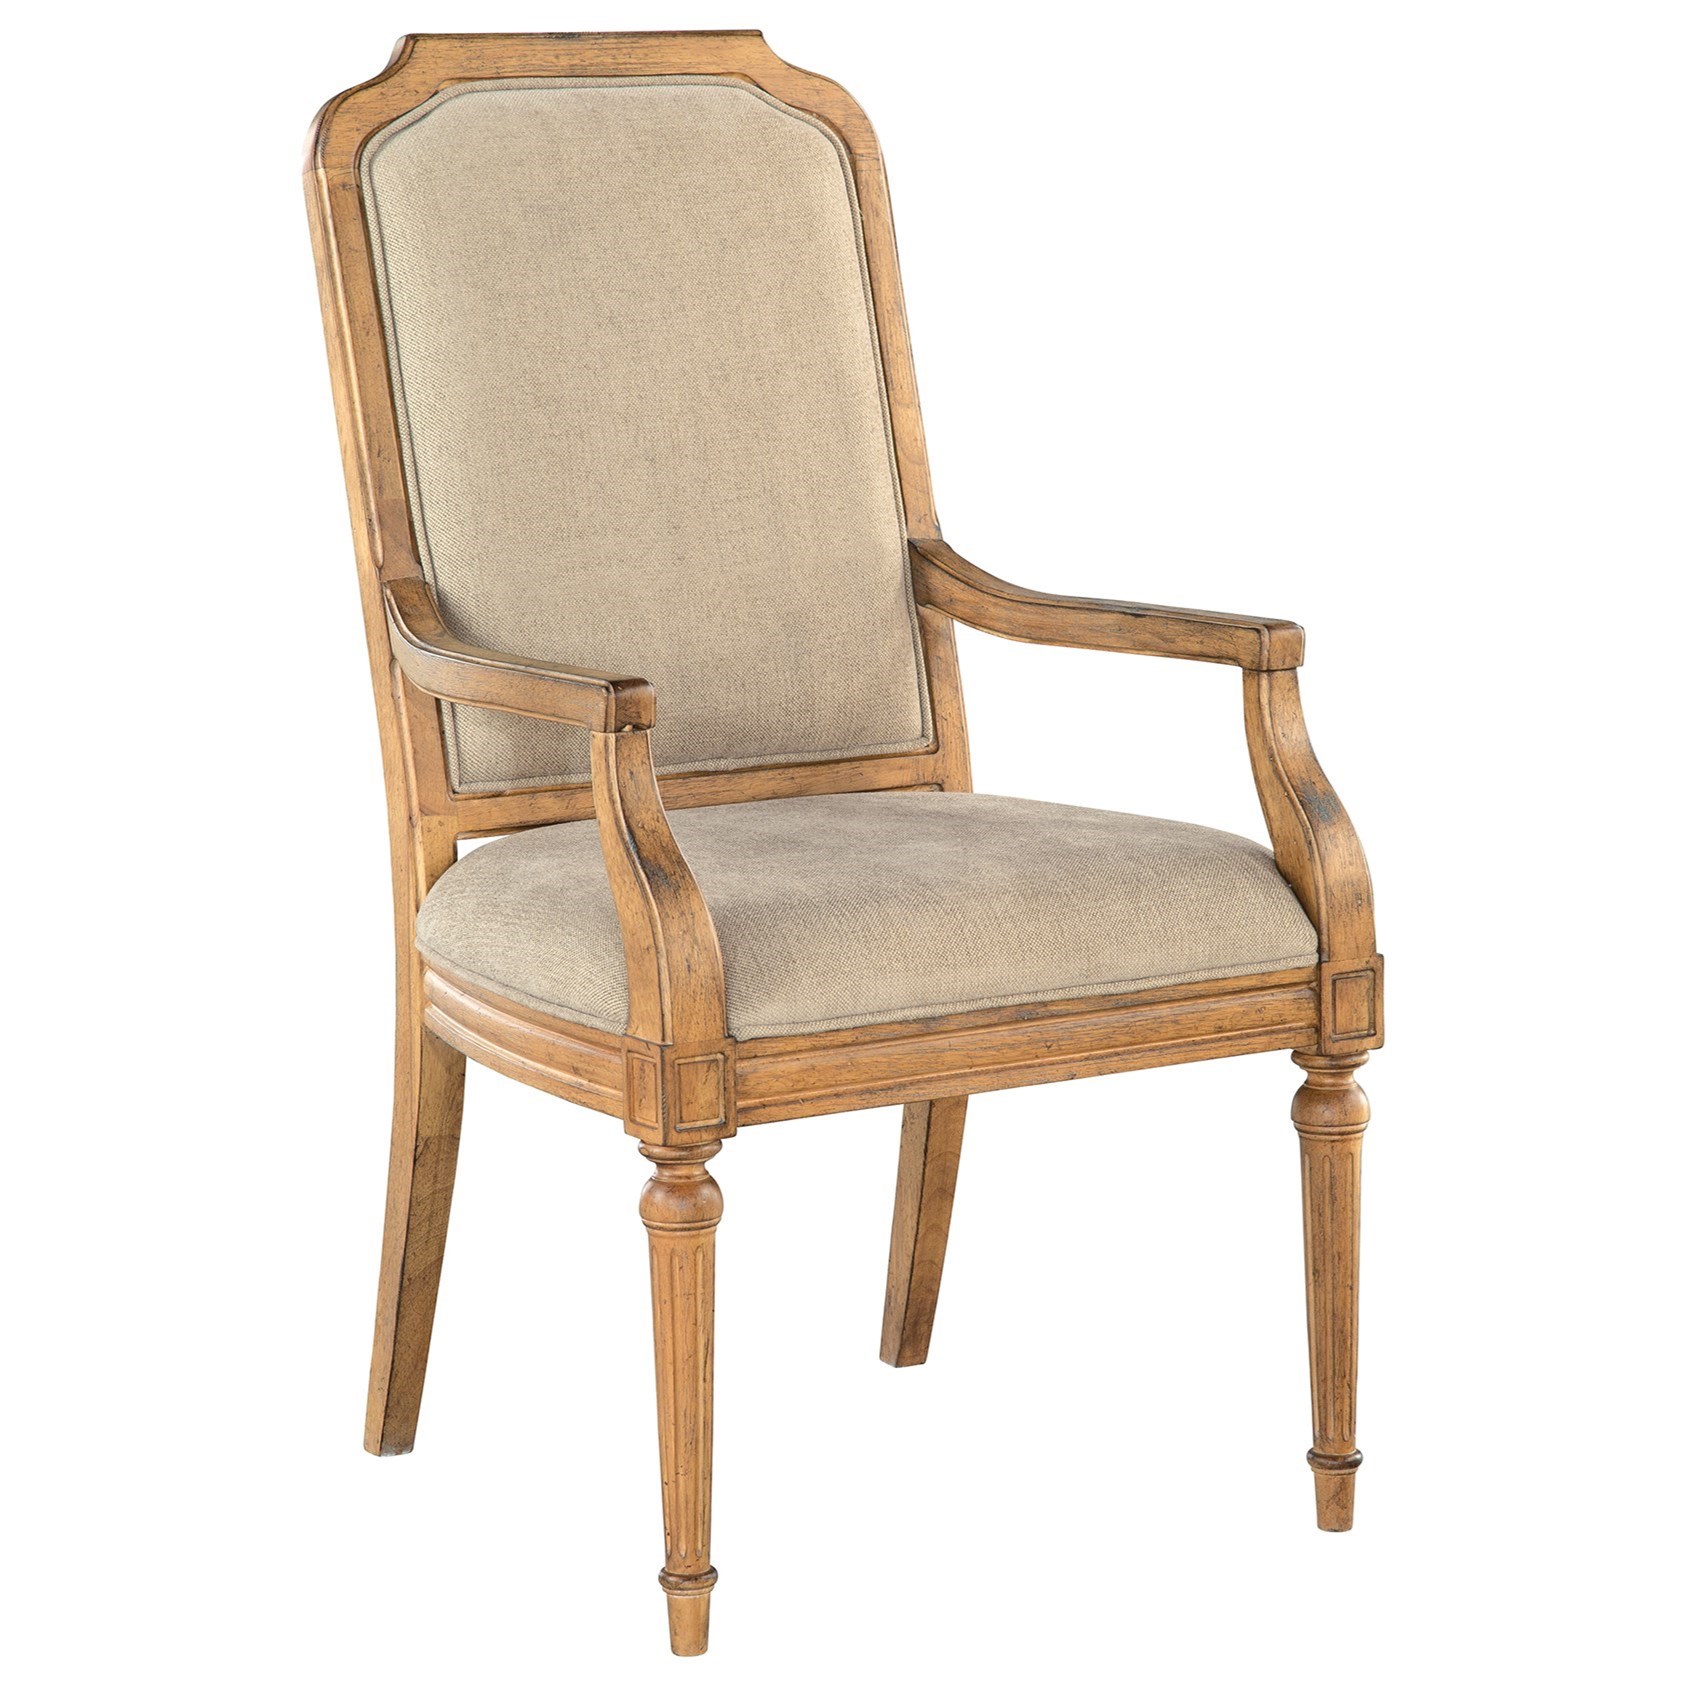 Upholstered Arm Chair with Wood Frame